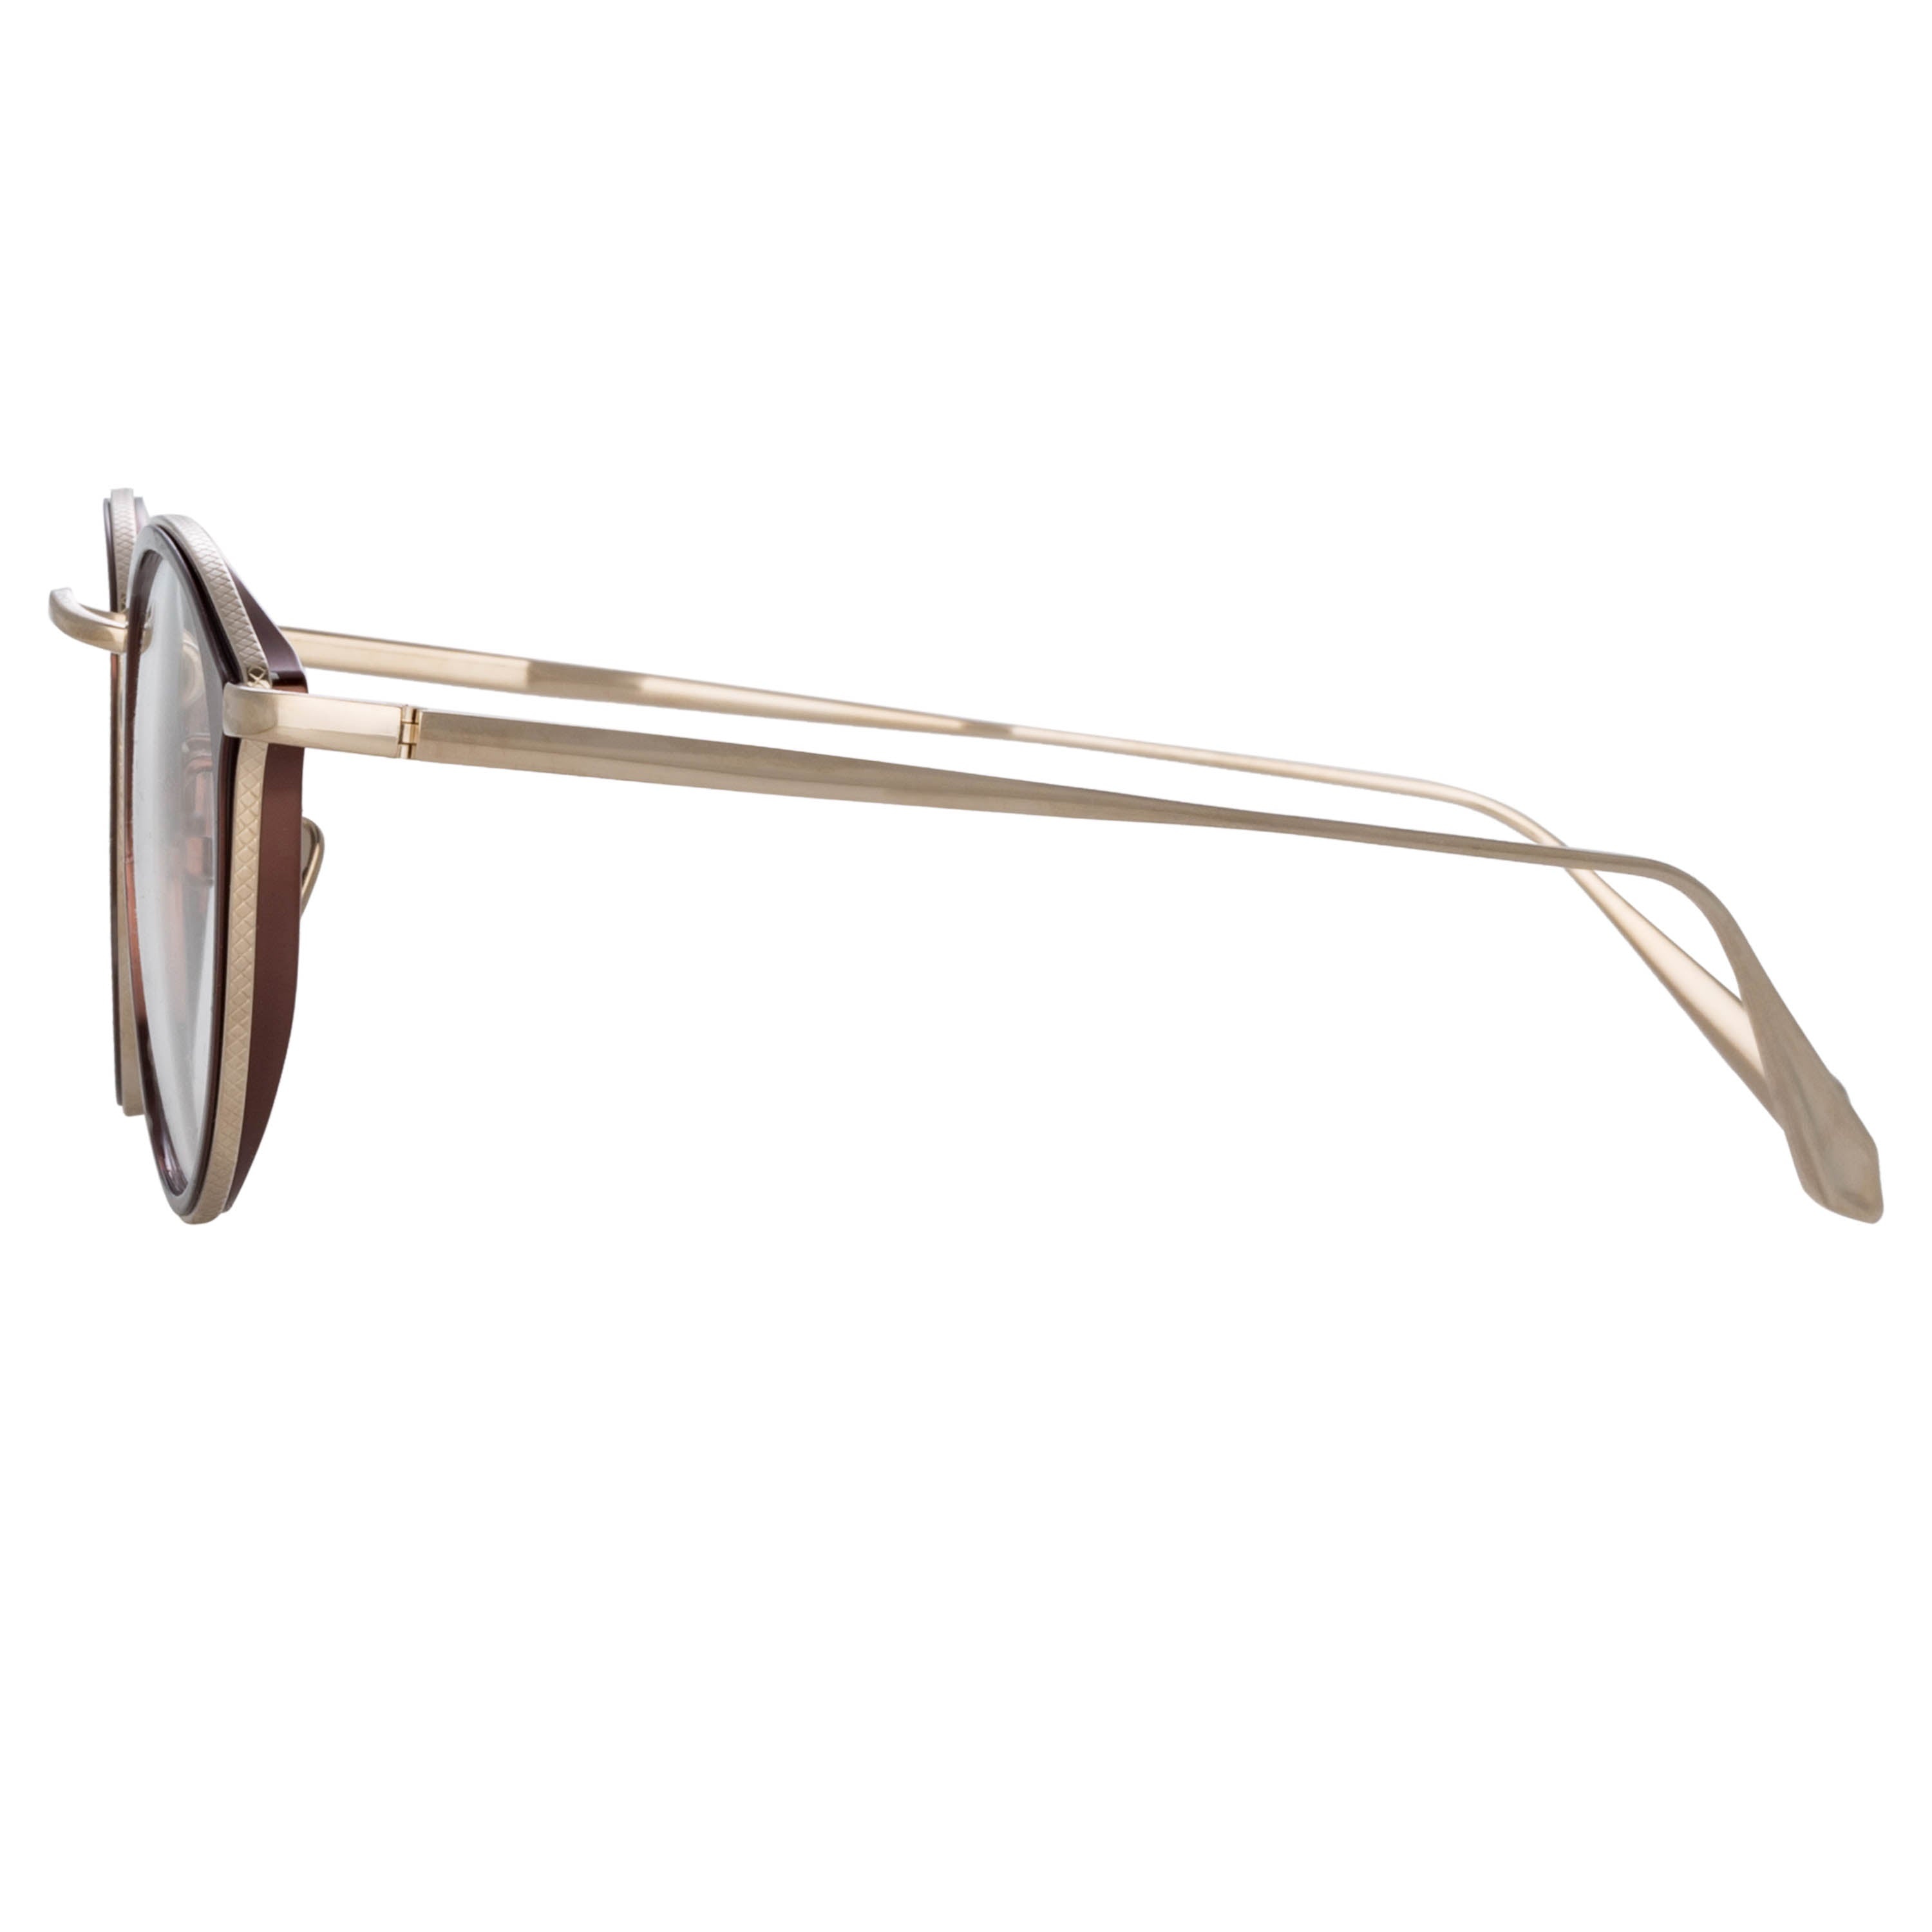 LUIS OVAL OPTICAL FRAME IN LIGHT GOLD AND BROWN - 3